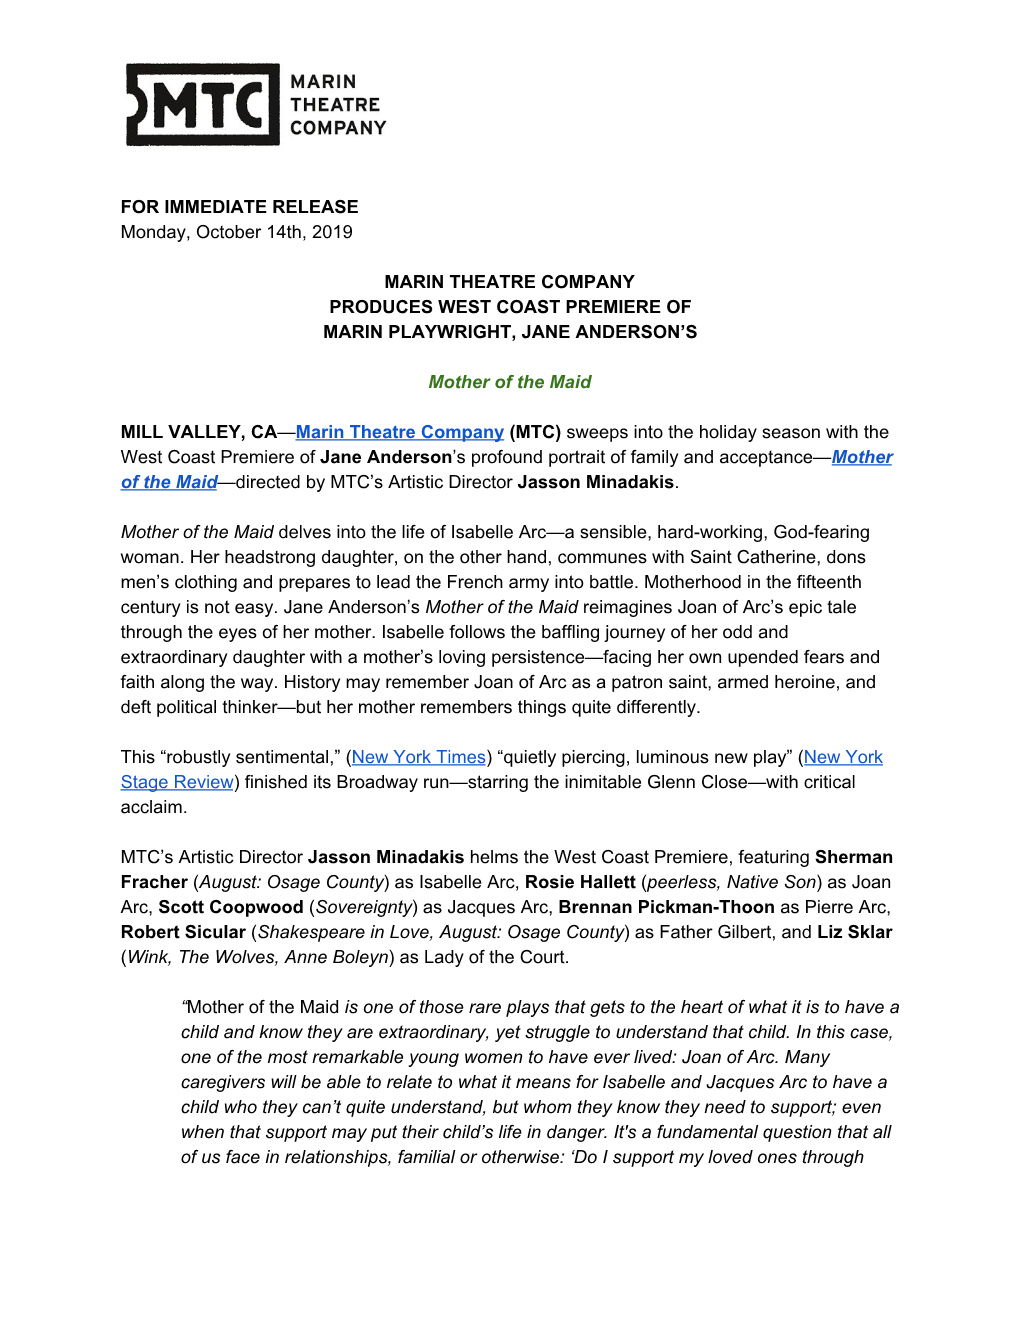 Mother of the Maid Press Release Marin Theatre Company